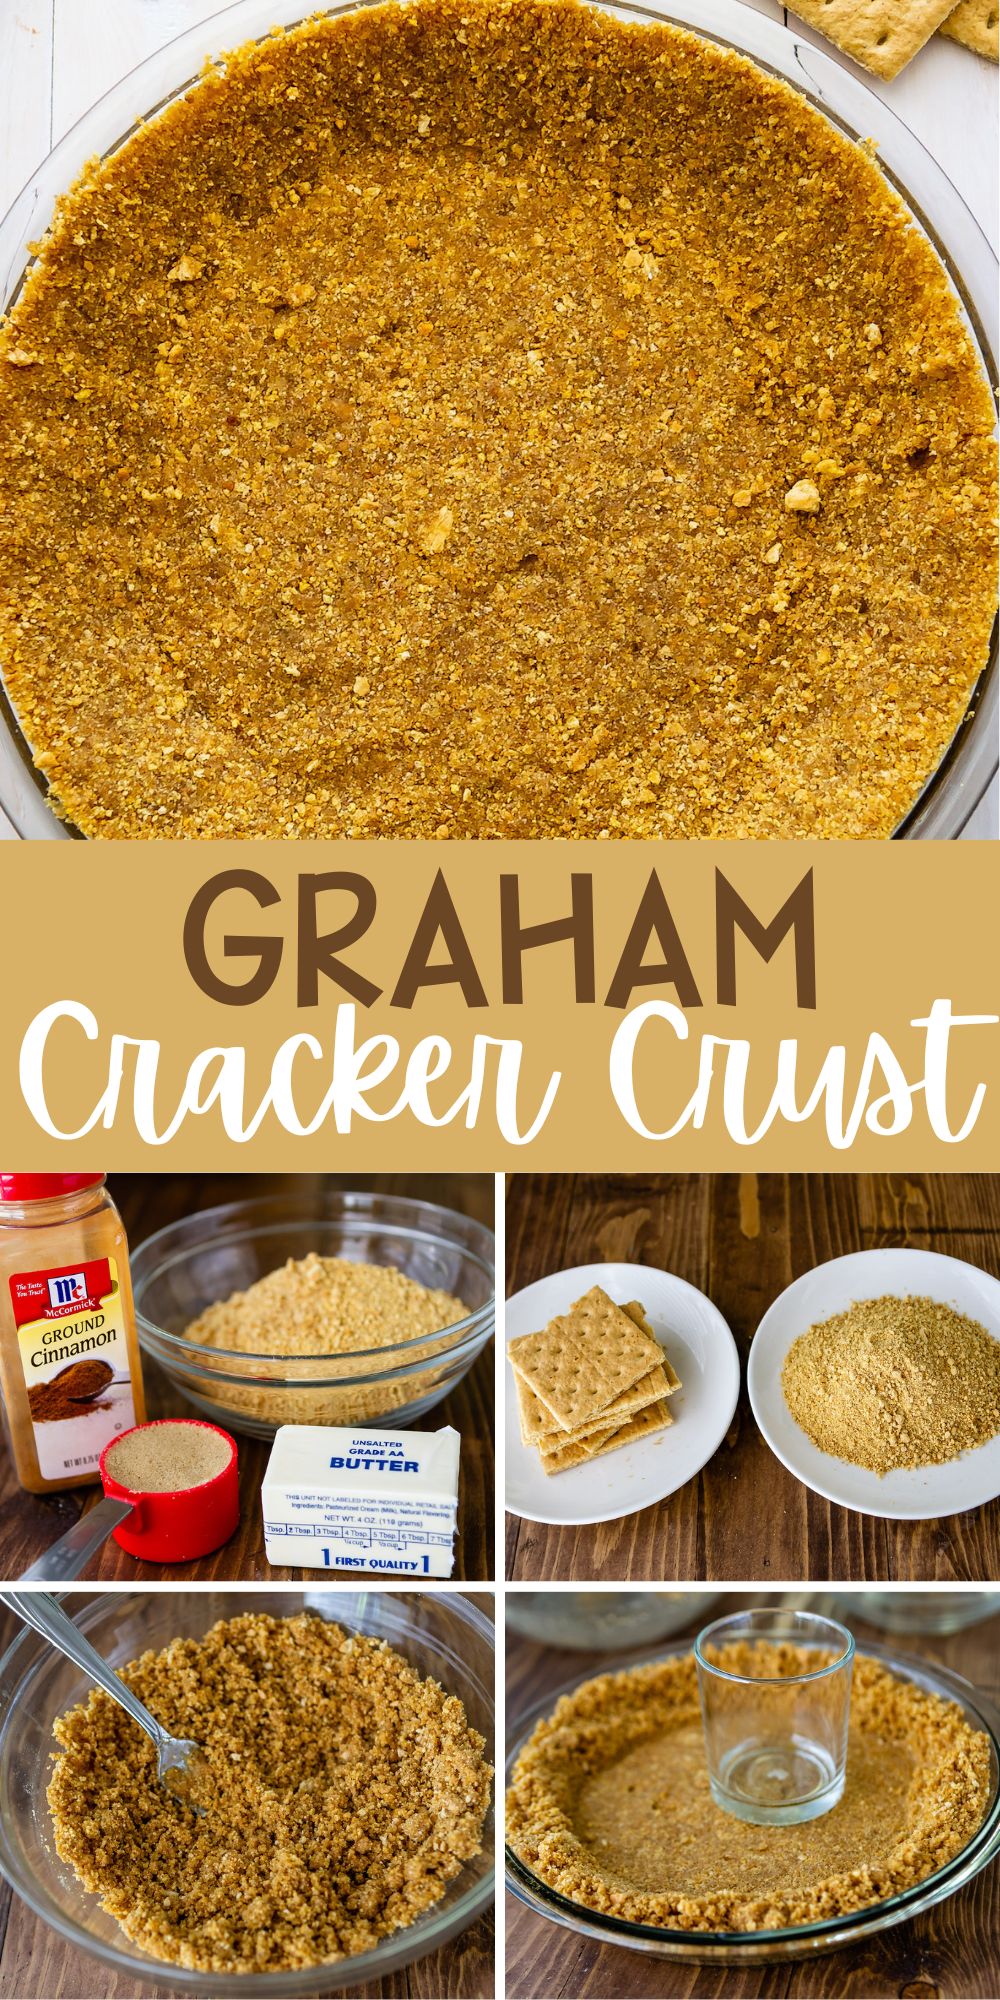 two photos of graham cracker crust in a clear pie and process shots of the crust with words on the image.